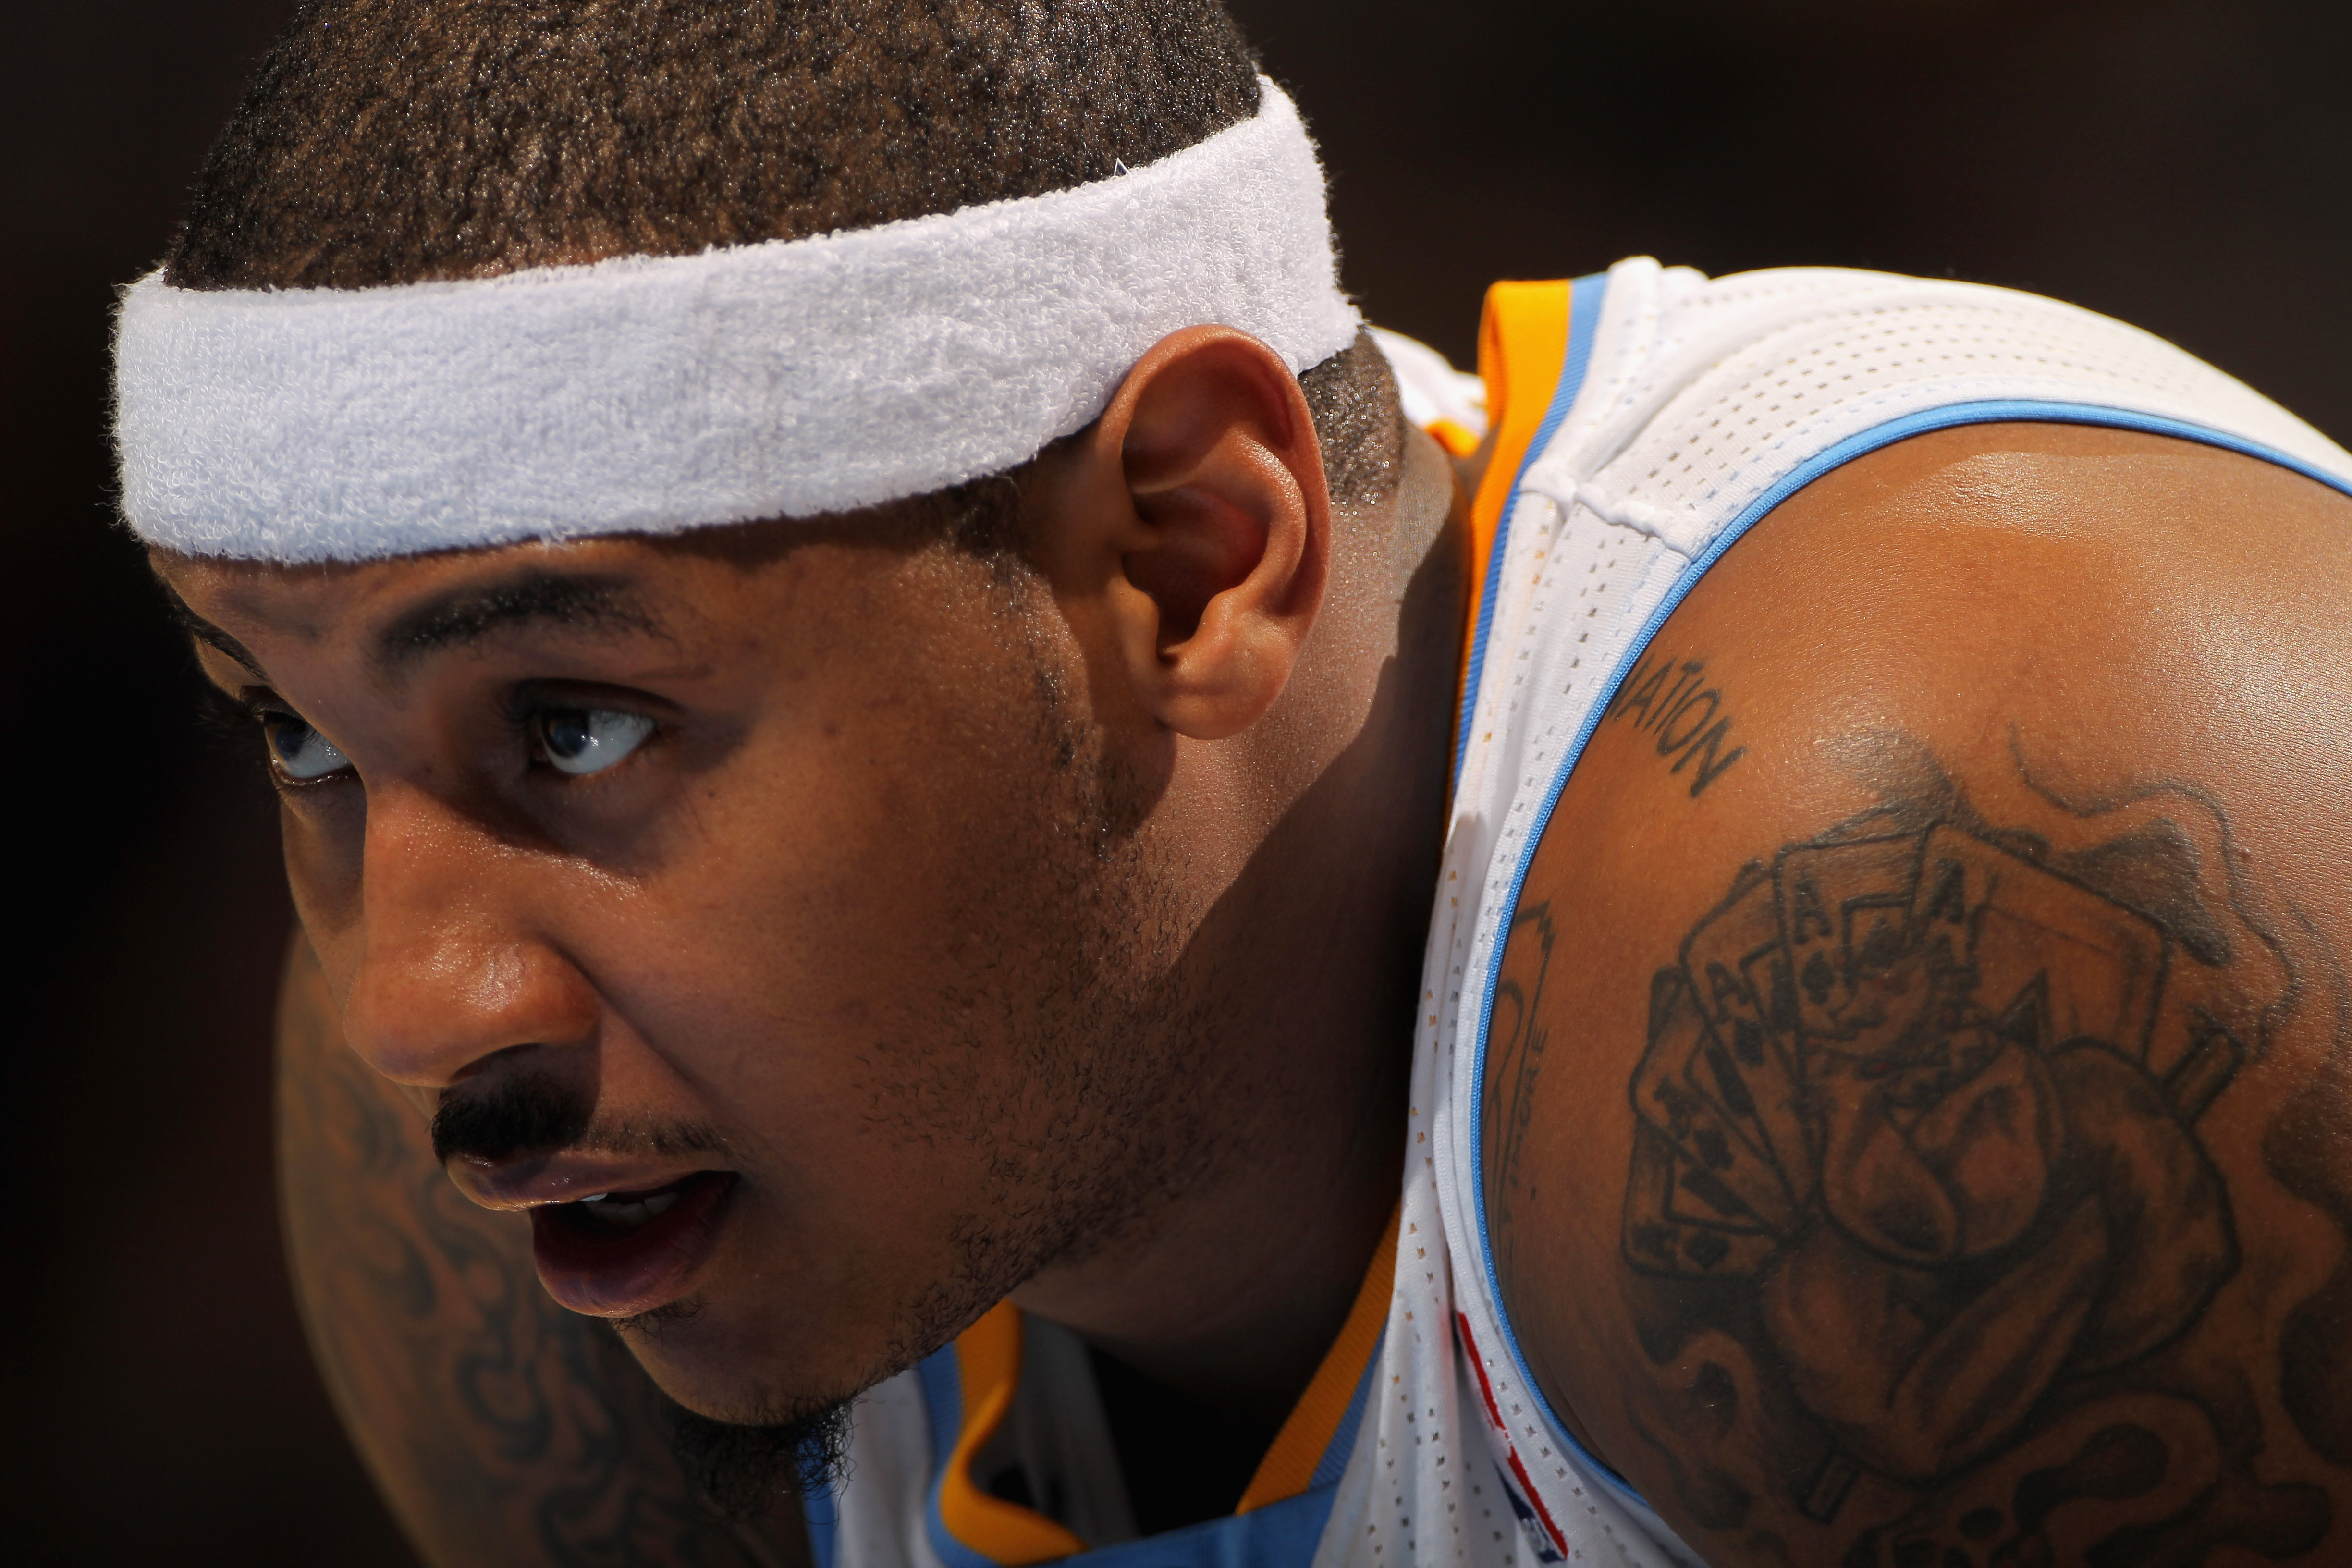 DENVER - NOVEMBER 16:  Carmelo Anthony #15 of the Denver Nuggets looks on during a break in the action against the New York Knicks at the Pepsi Center on November 16, 2010 in Denver, Colorado. The Nuggets defeated the Knicks 120-118. NOTE TO USER: User ex